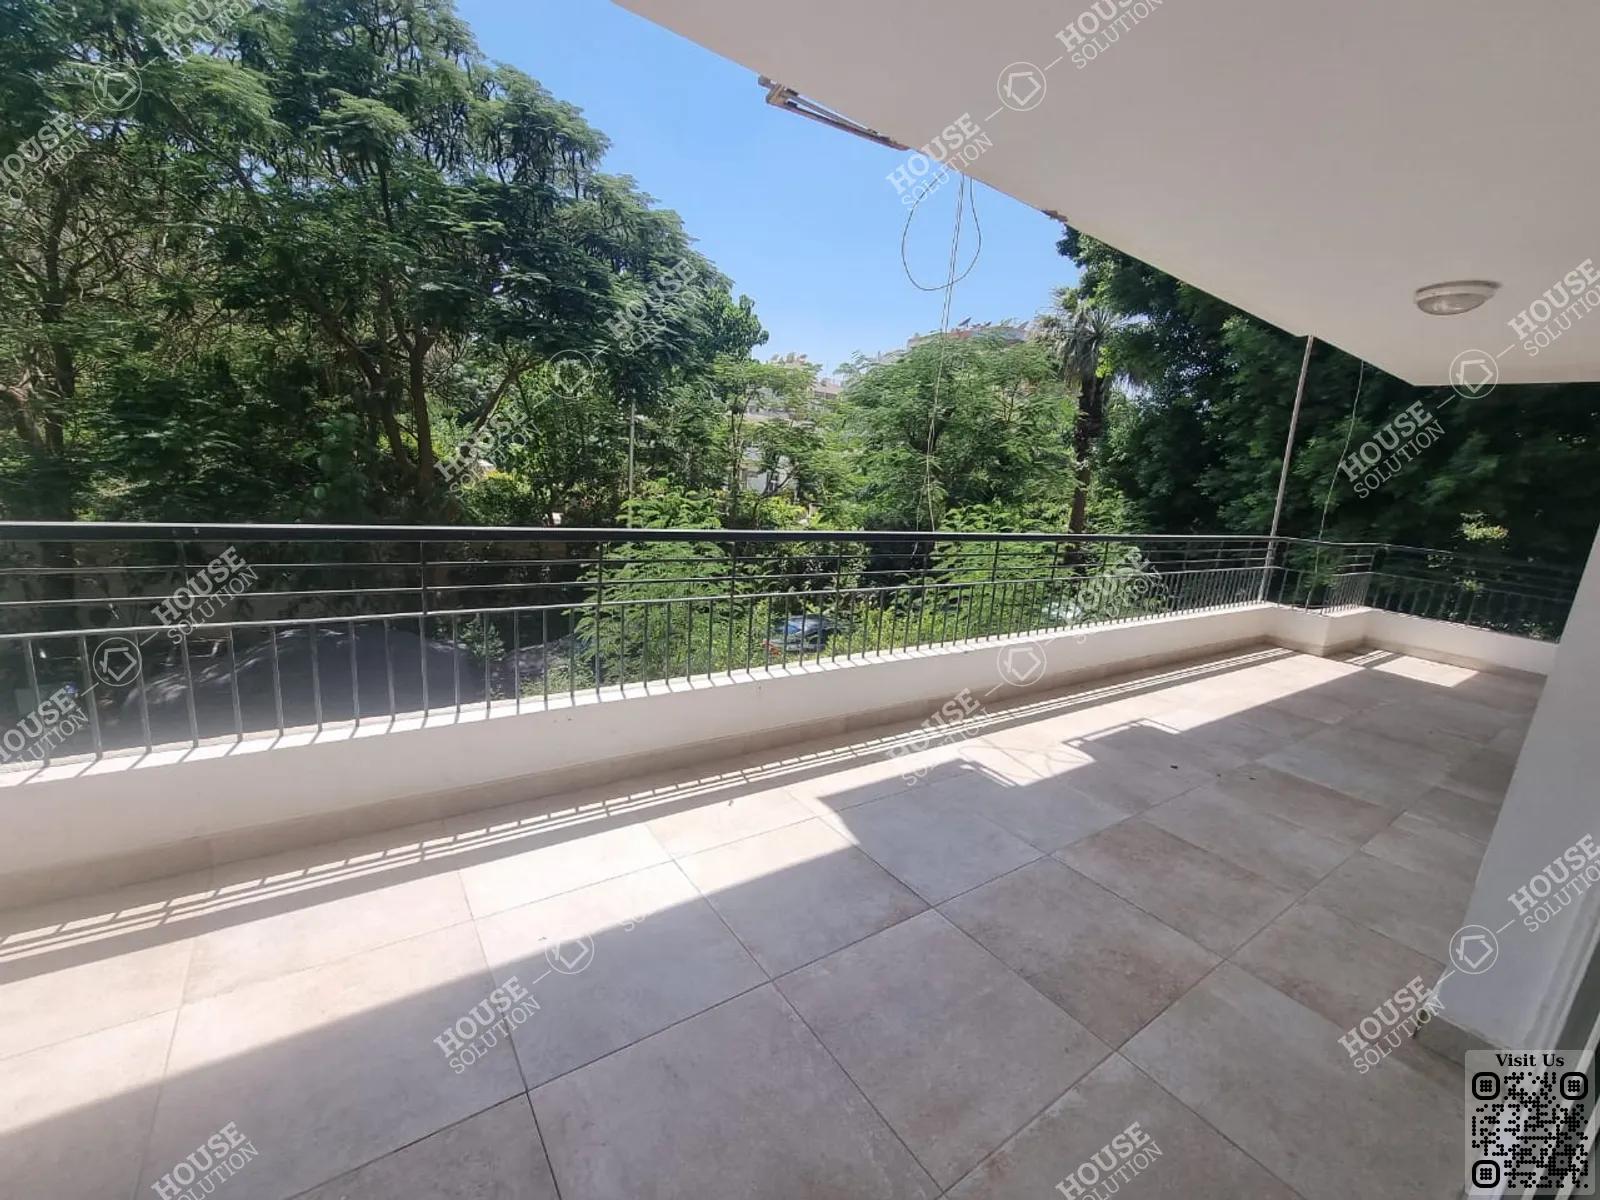 BALCONY  @ Apartments For Rent In Maadi Maadi Sarayat Area: 200 m² consists of 3 Bedrooms 2 Bathrooms Finished 5 stars #4874-1